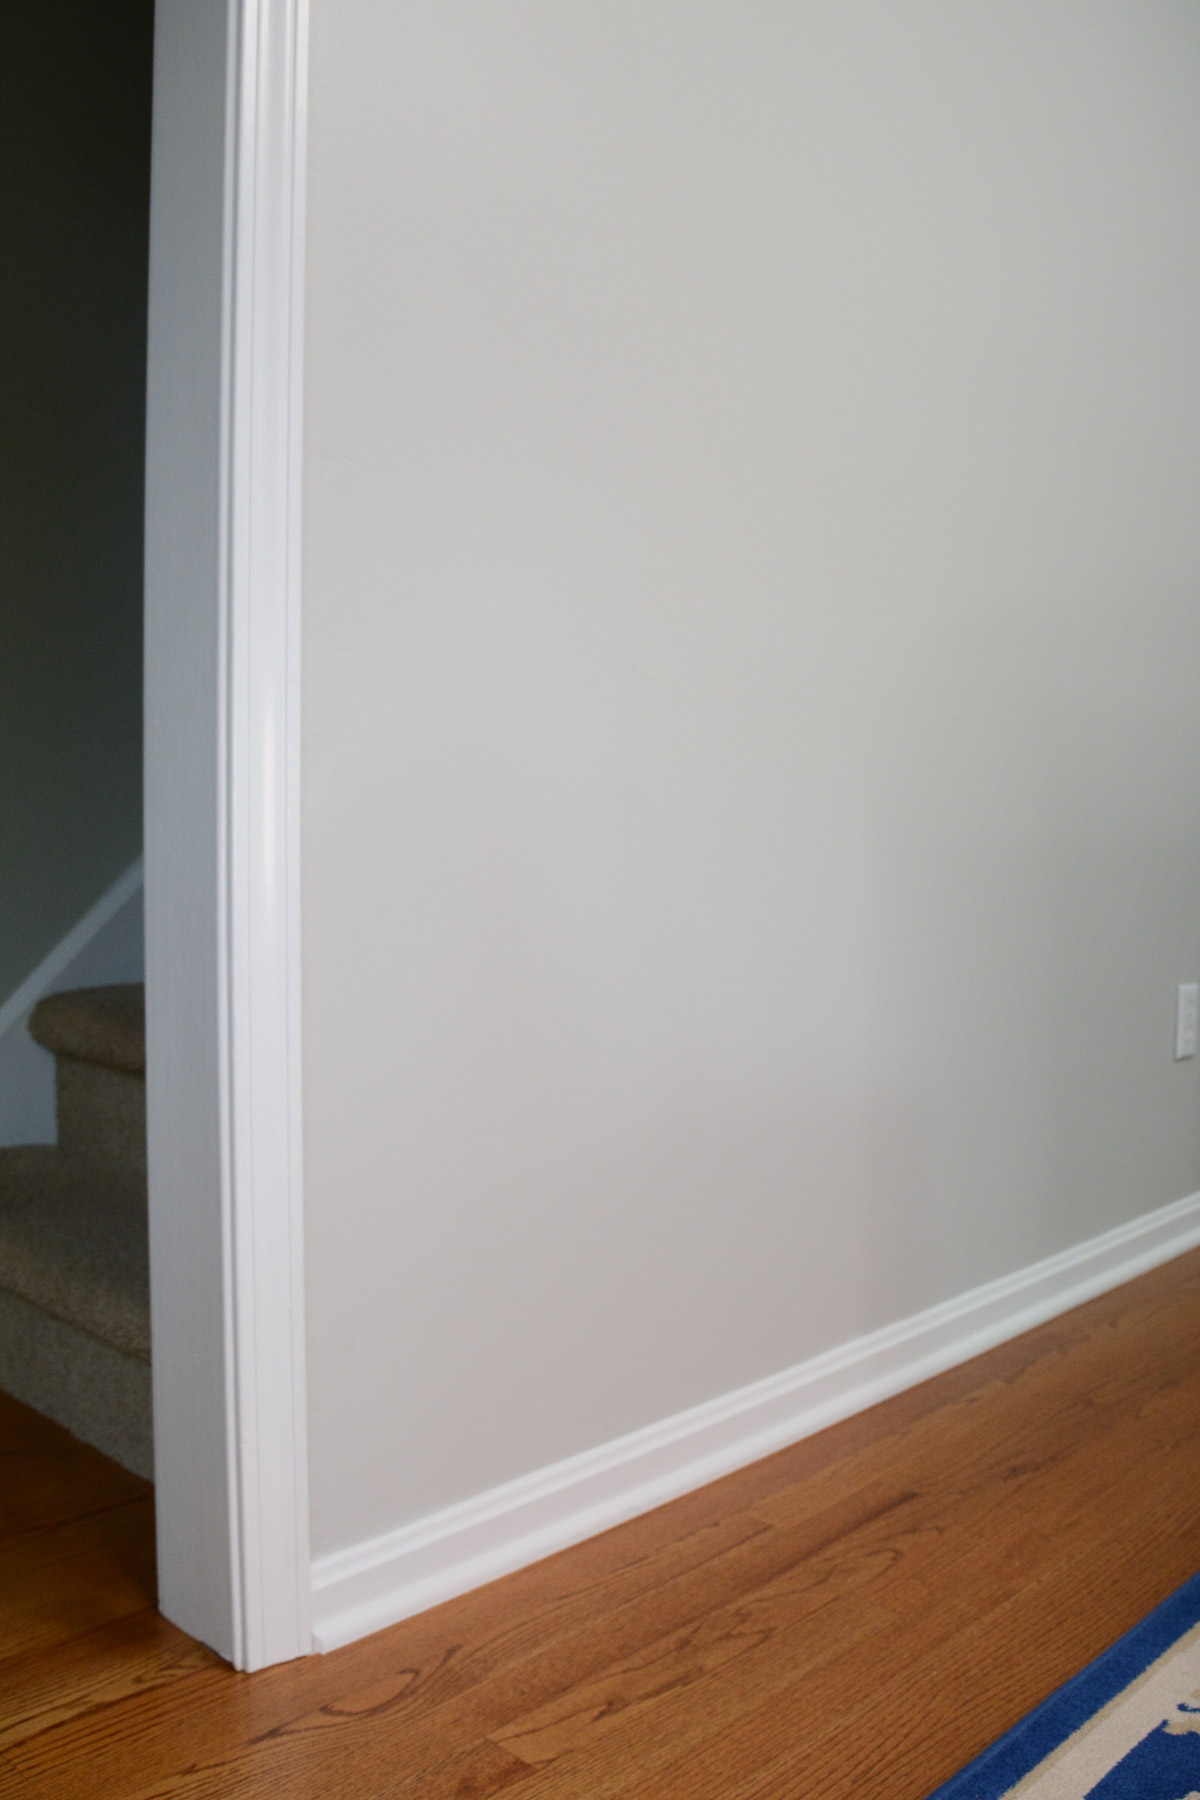 white trim and baseboards with gray walls and wood floor.